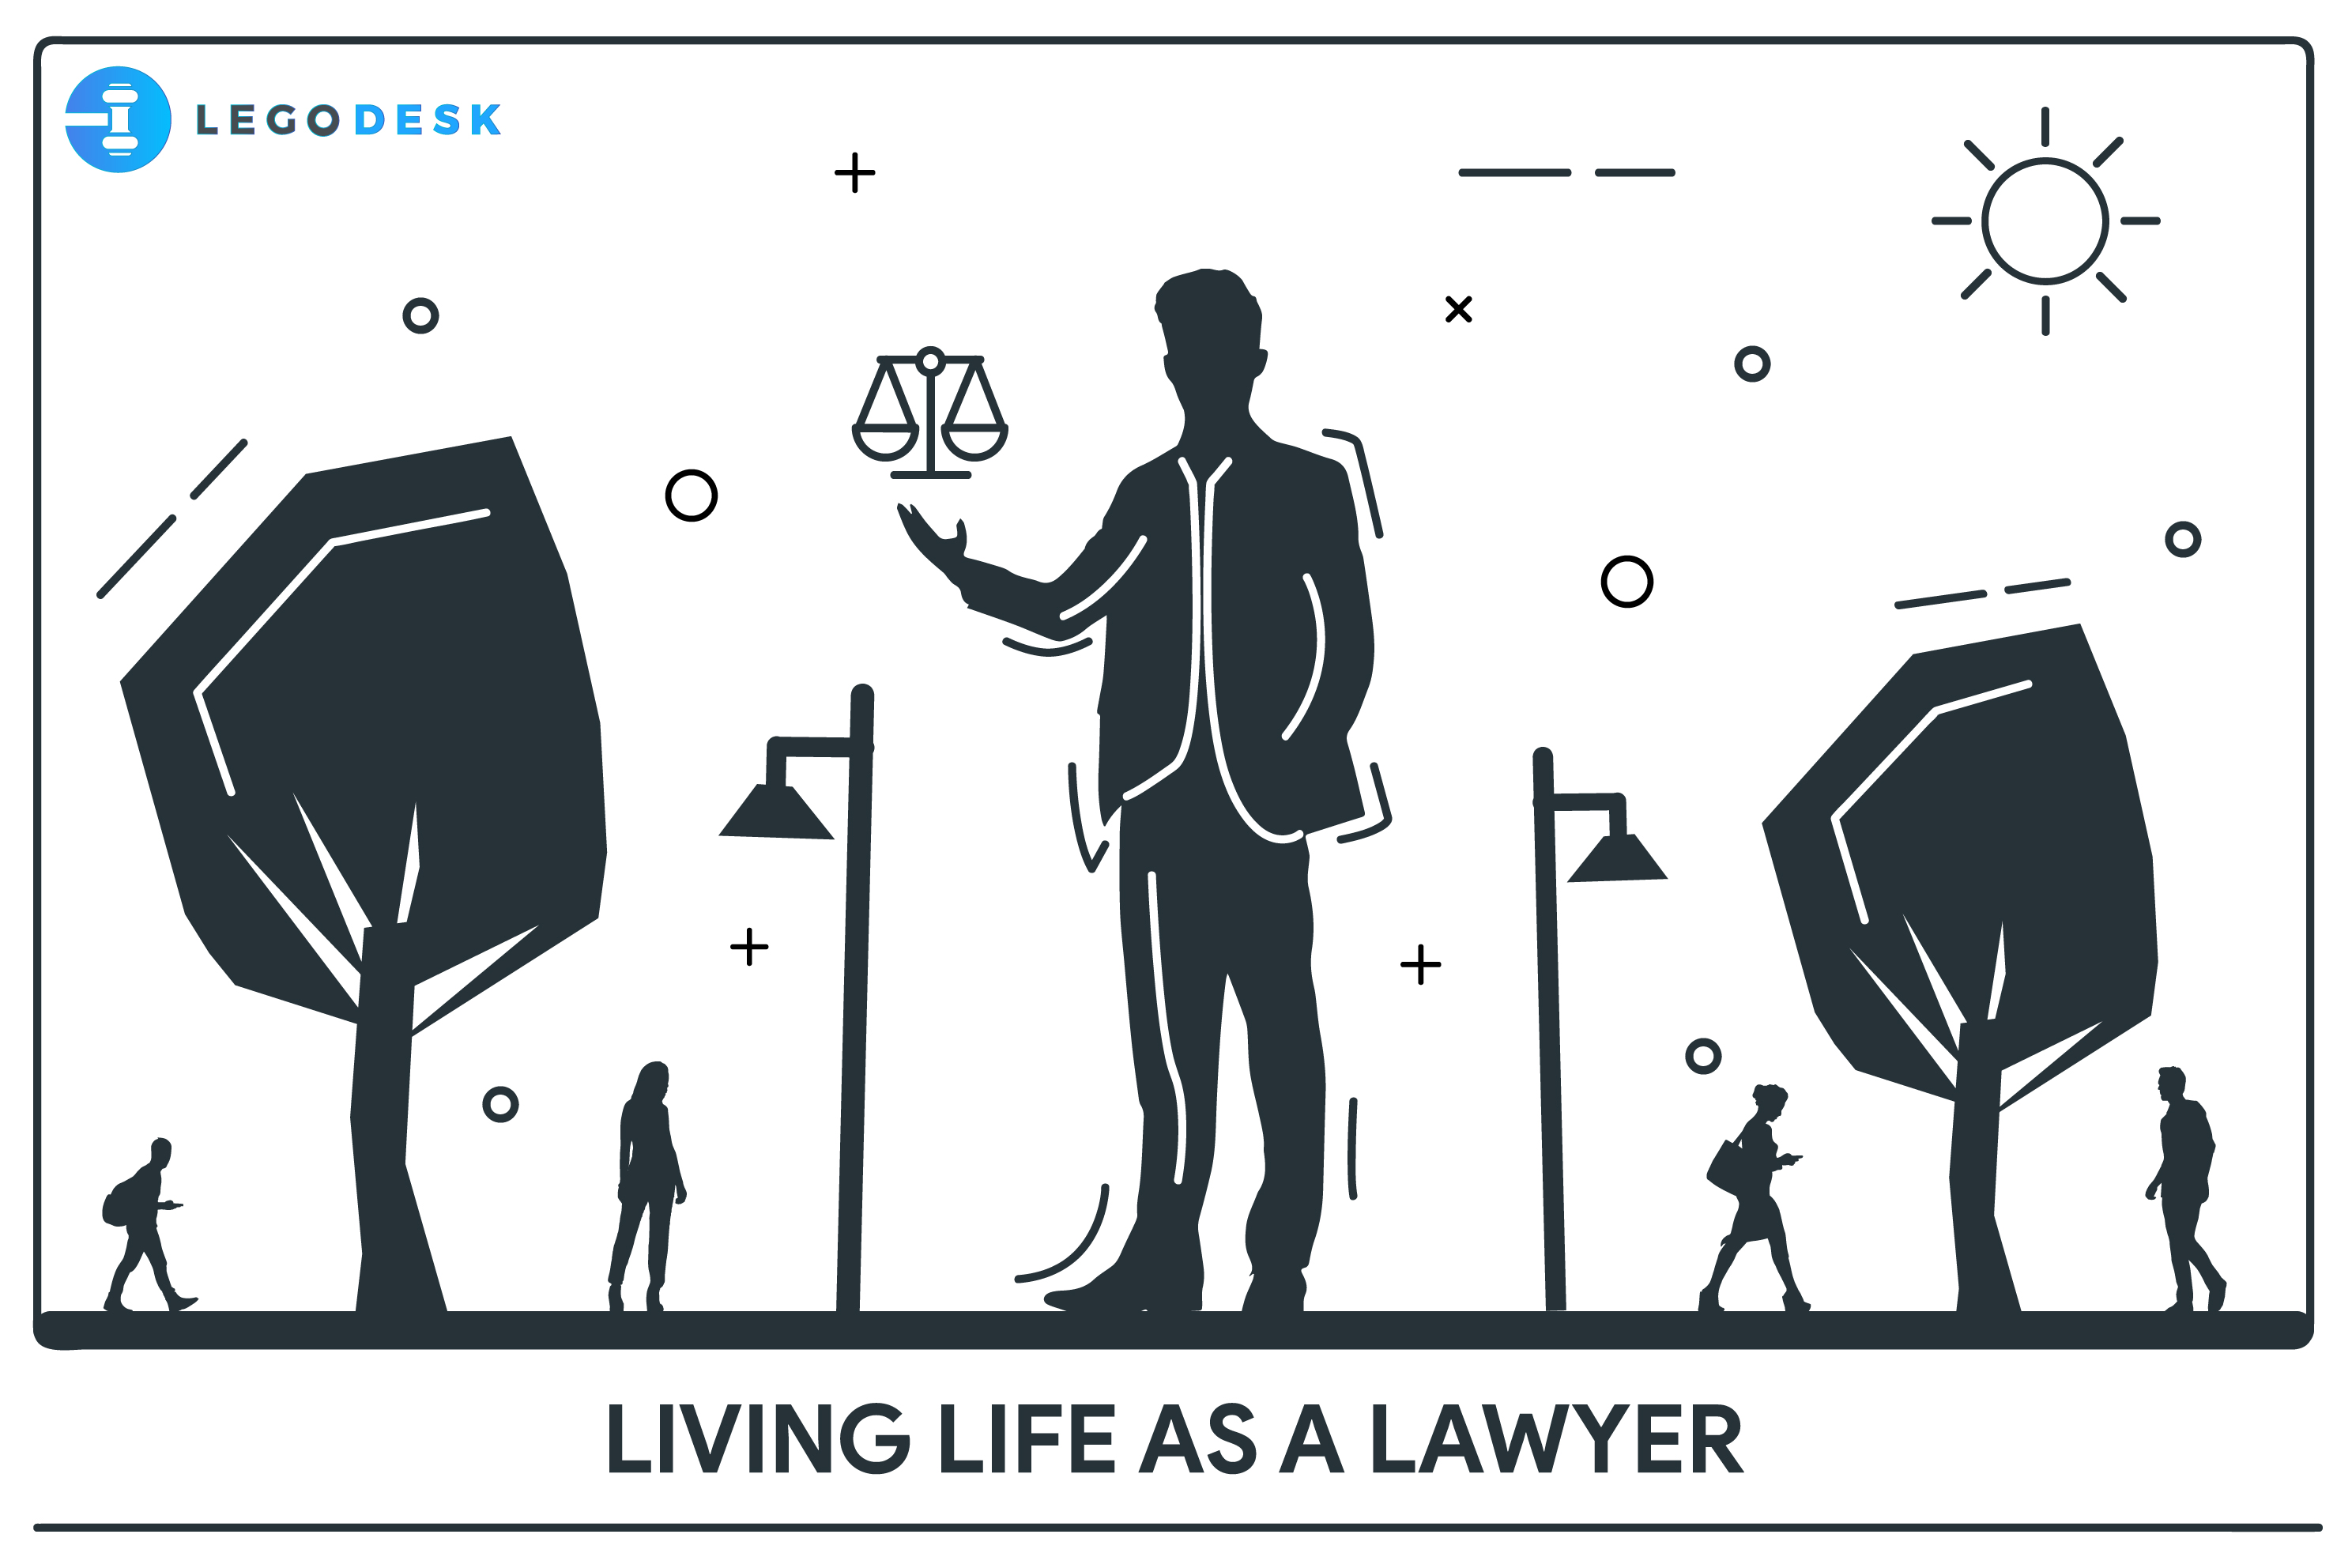 Living life as a Lawyer